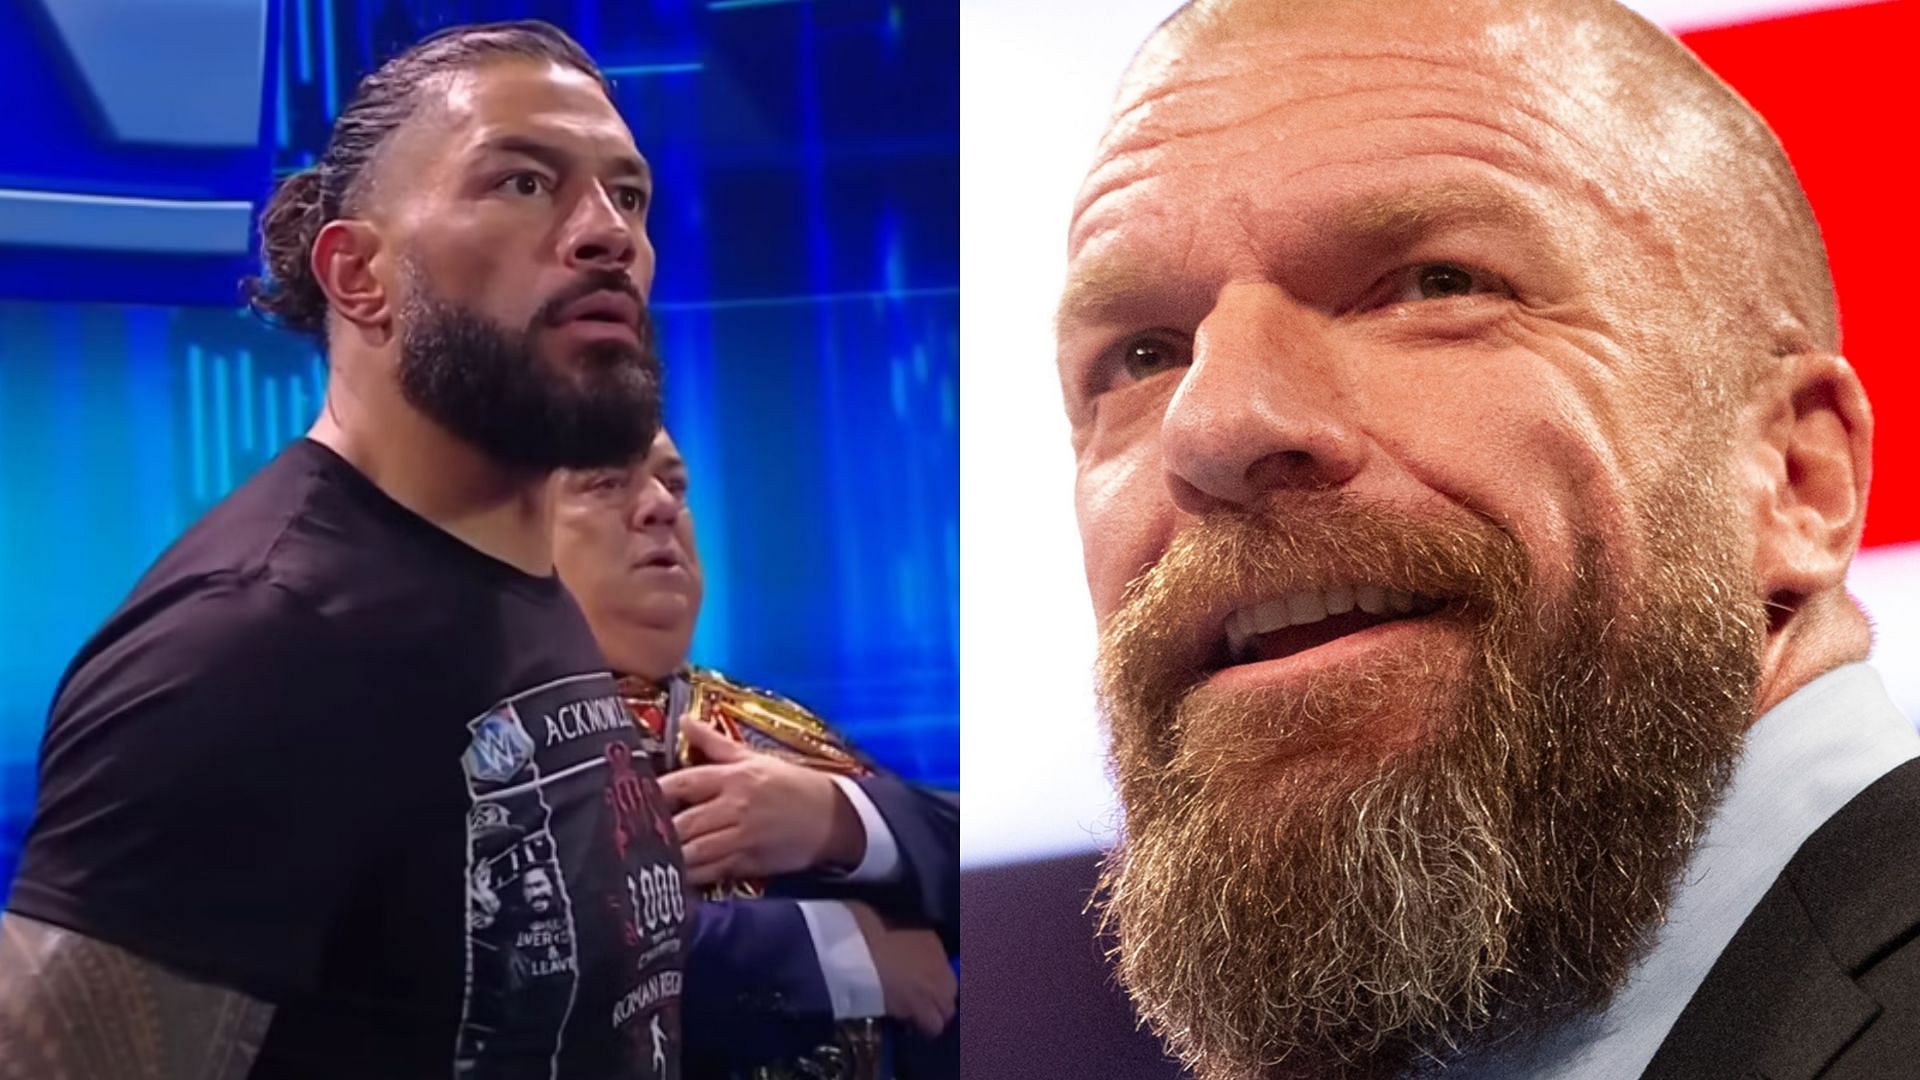 Undisputed WWE Universal Champion Roman Reigns (left) and WWE CCO Triple H (right)